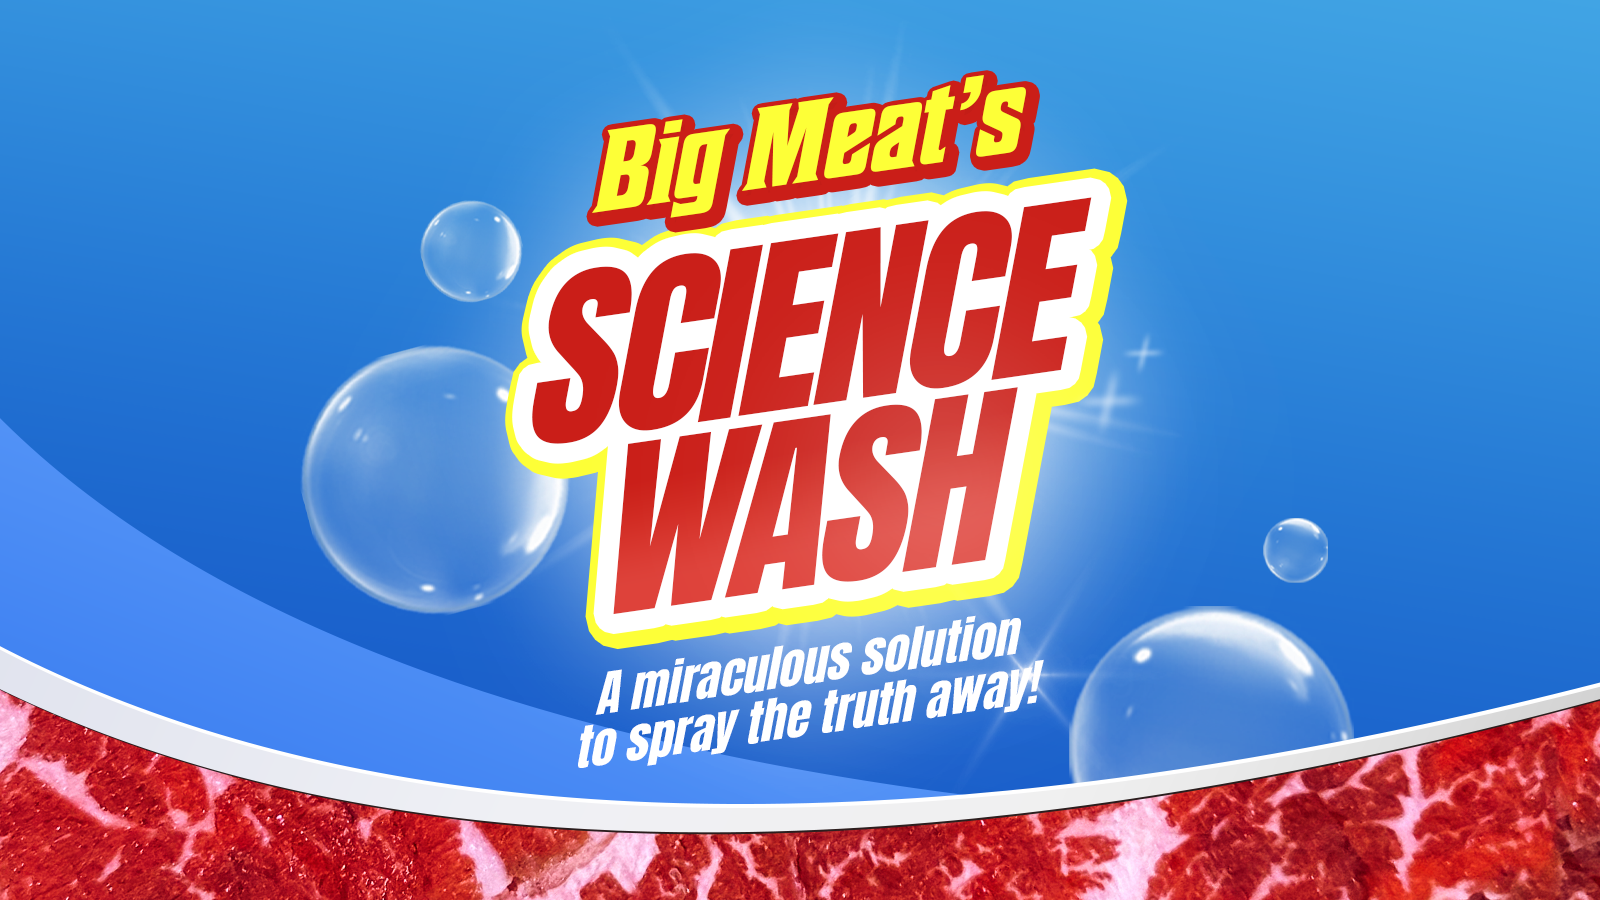 Big Meat's Sciencewash: a miraculous solution to spray the truth away! Big Meat and Dairy companies sciencewashing 16:9 GPI website article blog cover